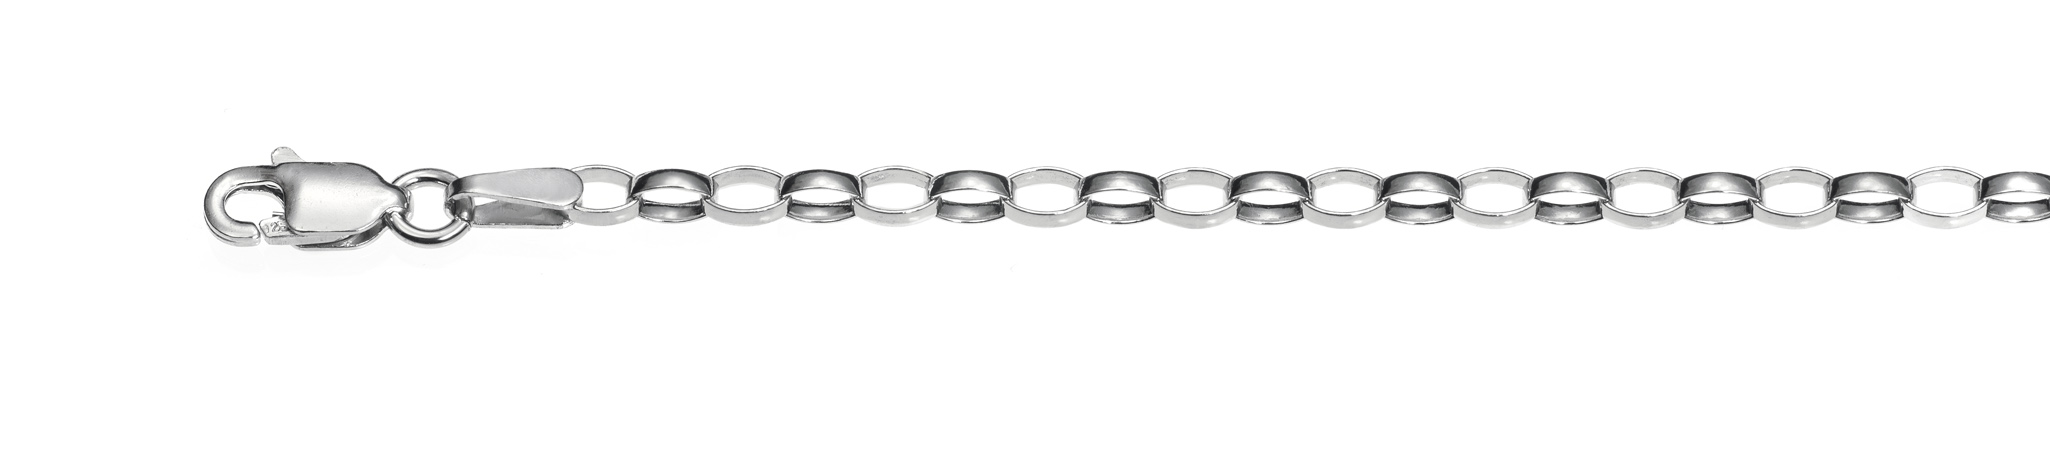 Ref.: 96030 - Oval rolo 0.30 rhodium plated silver - Wide 2.5